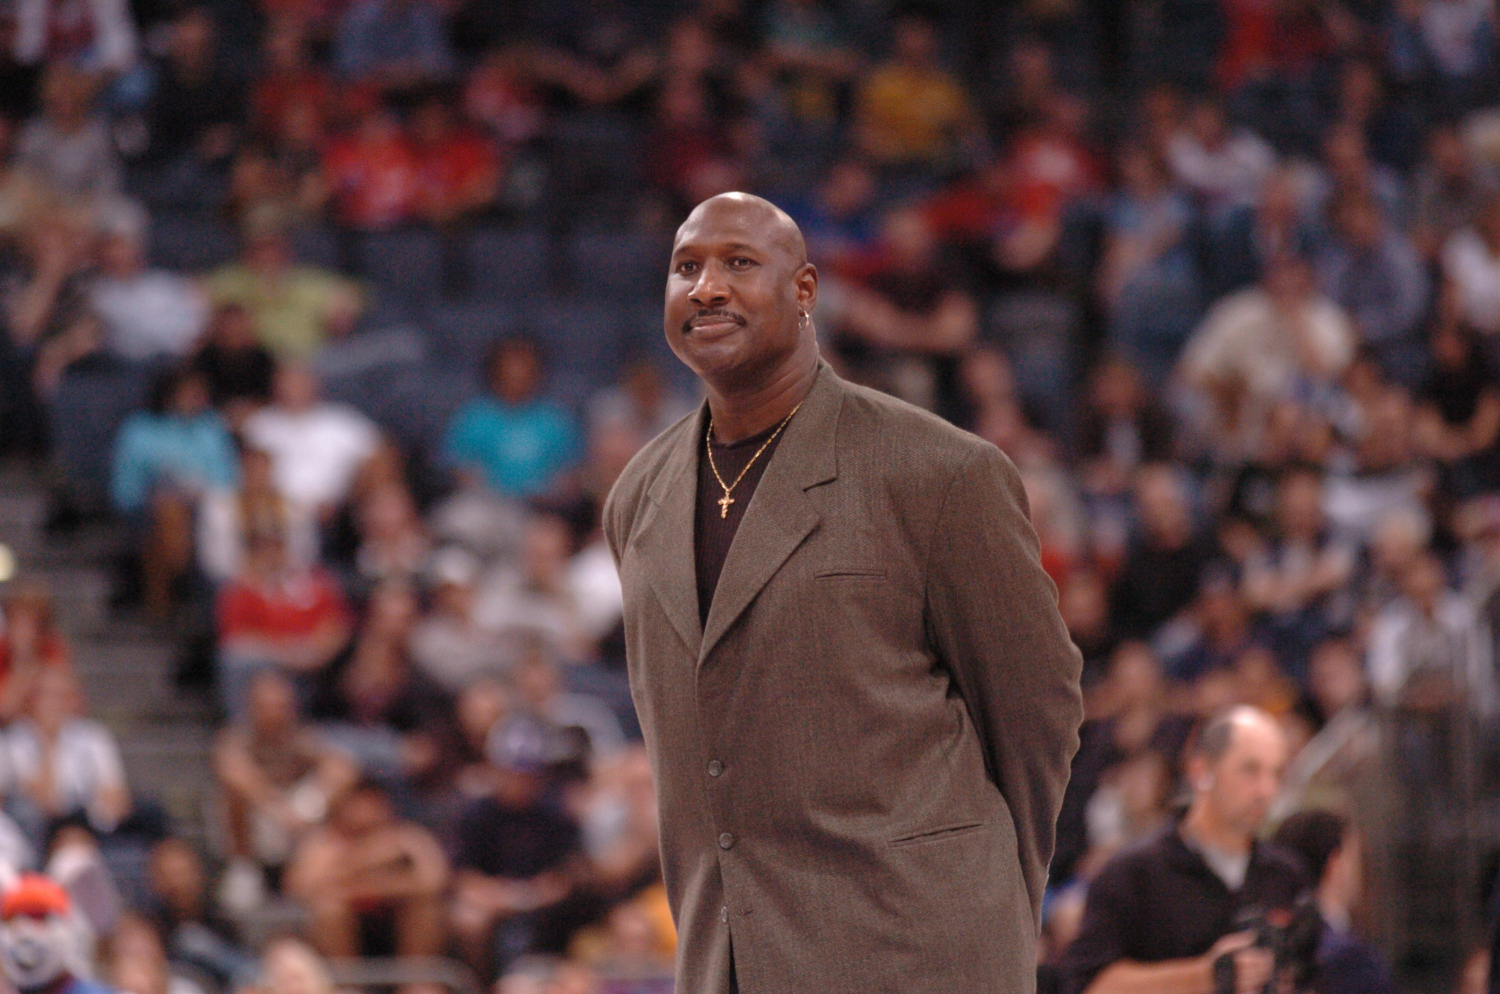 PICTURES: Public viewing for Darryl Dawkins – The Morning Call